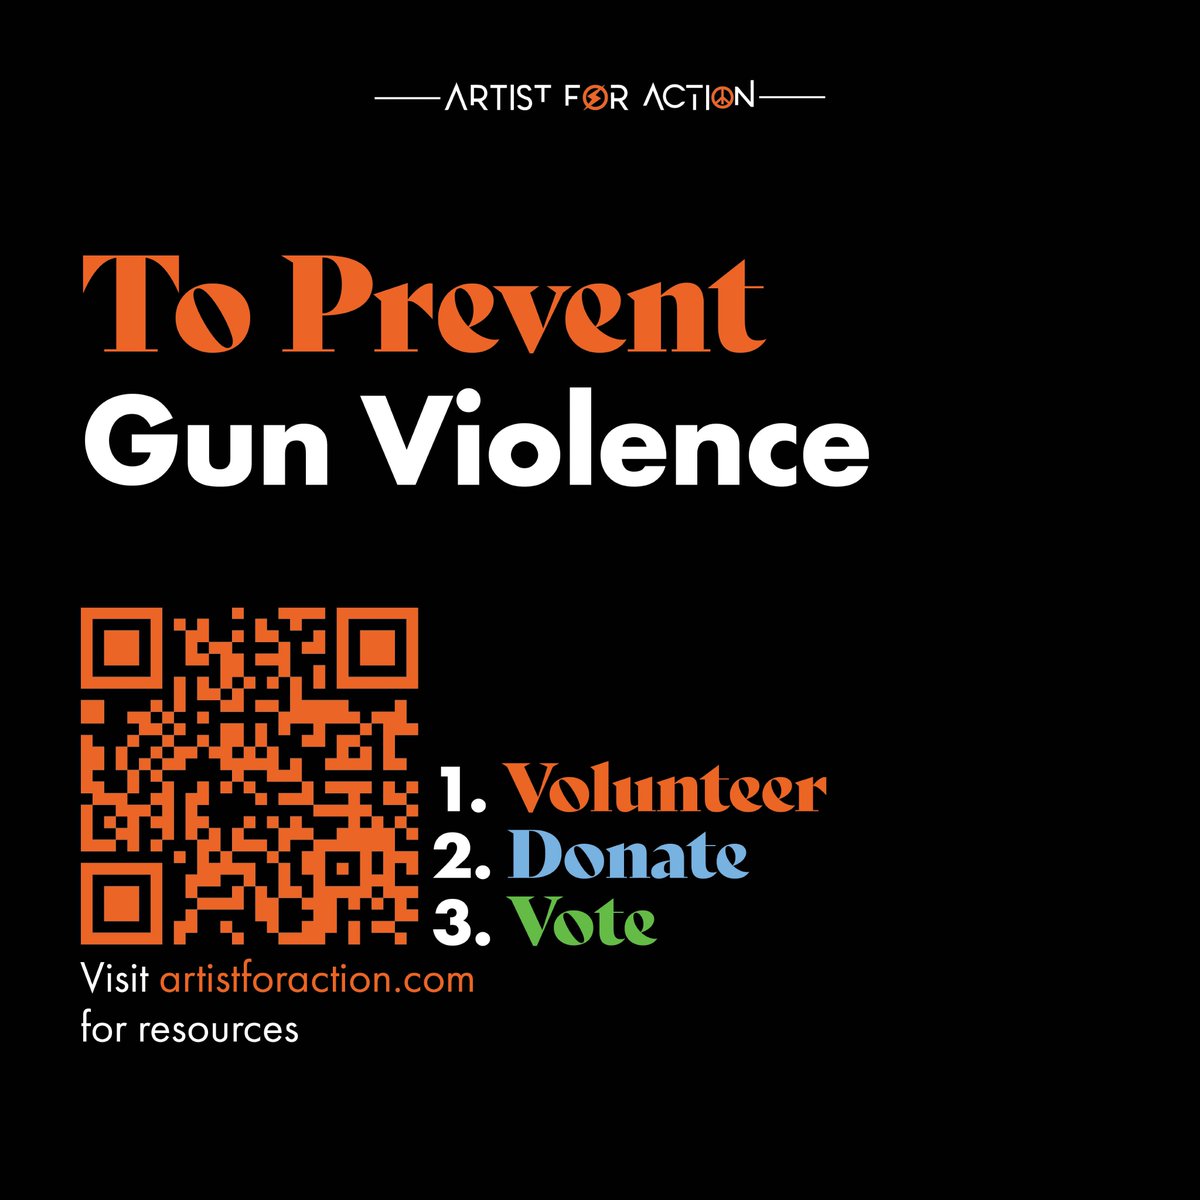 We support @ArtistforAction  —  a coalition of musicians who have come together to take on the gun violence epidemic and make our communities safer!

Get involved now at artistforaction.com!